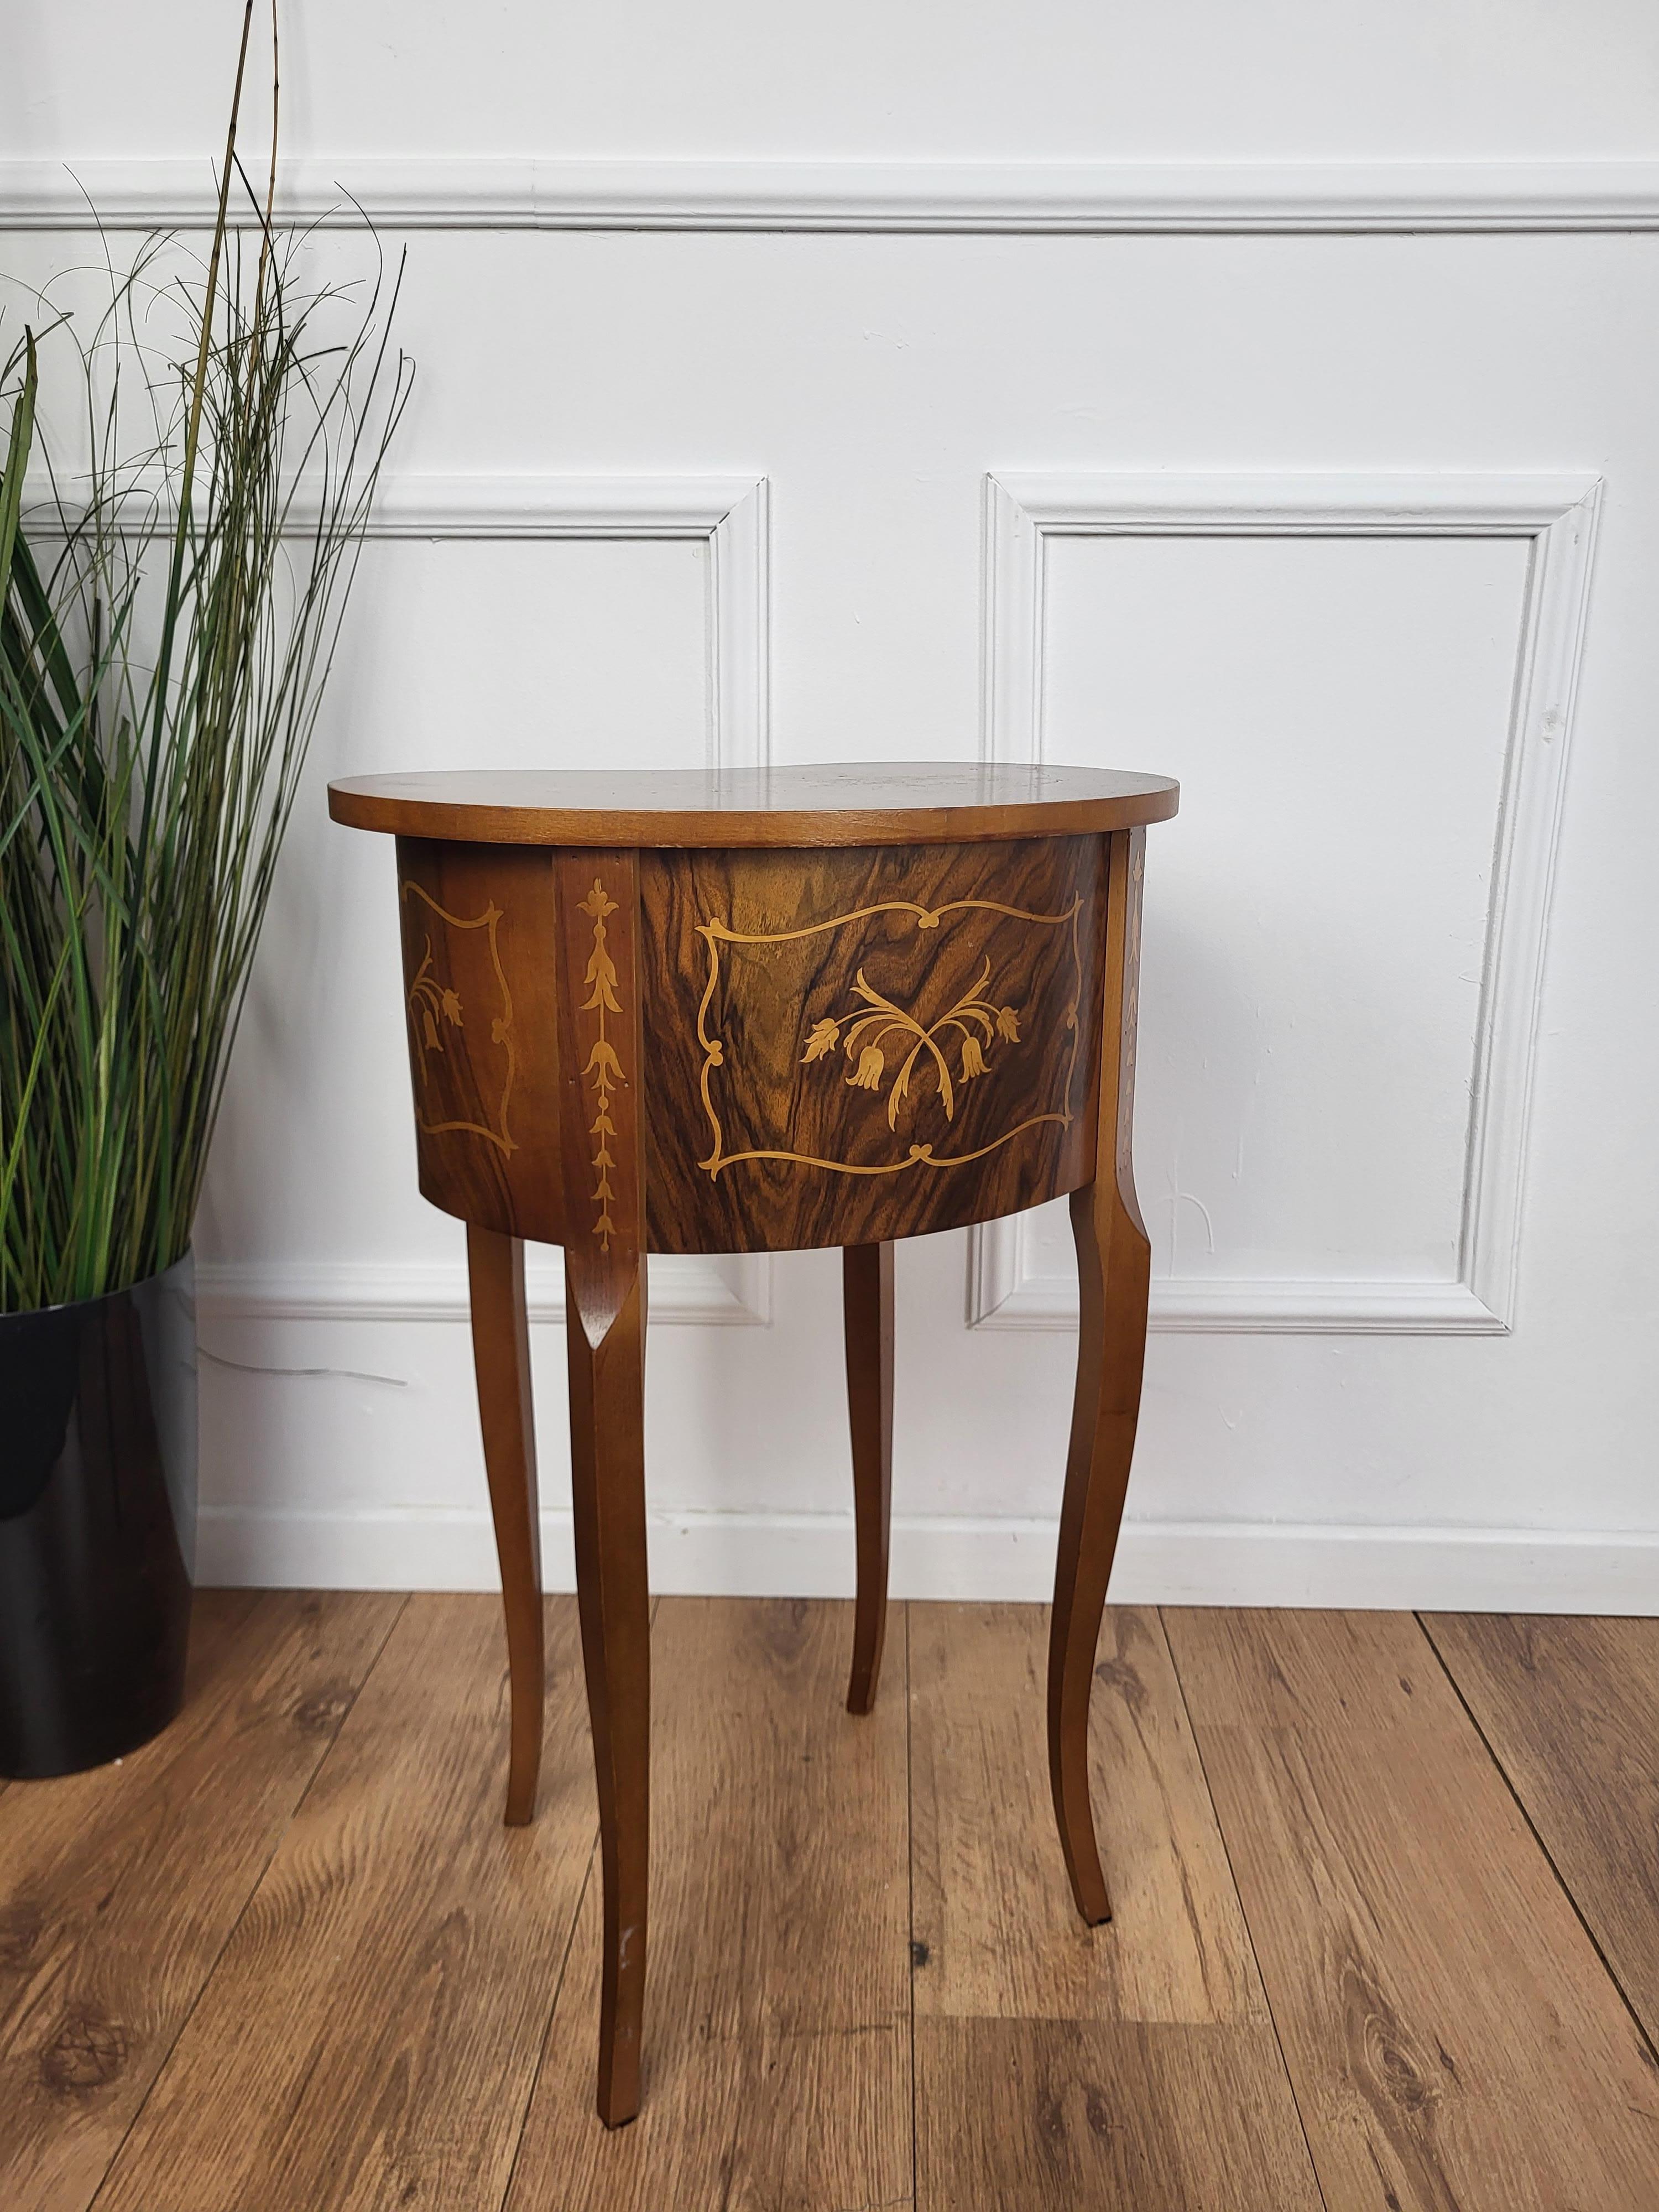 Bronze Italian Antique Marquetry Kidney Shaped Walnut Side Table with Two Drawers For Sale